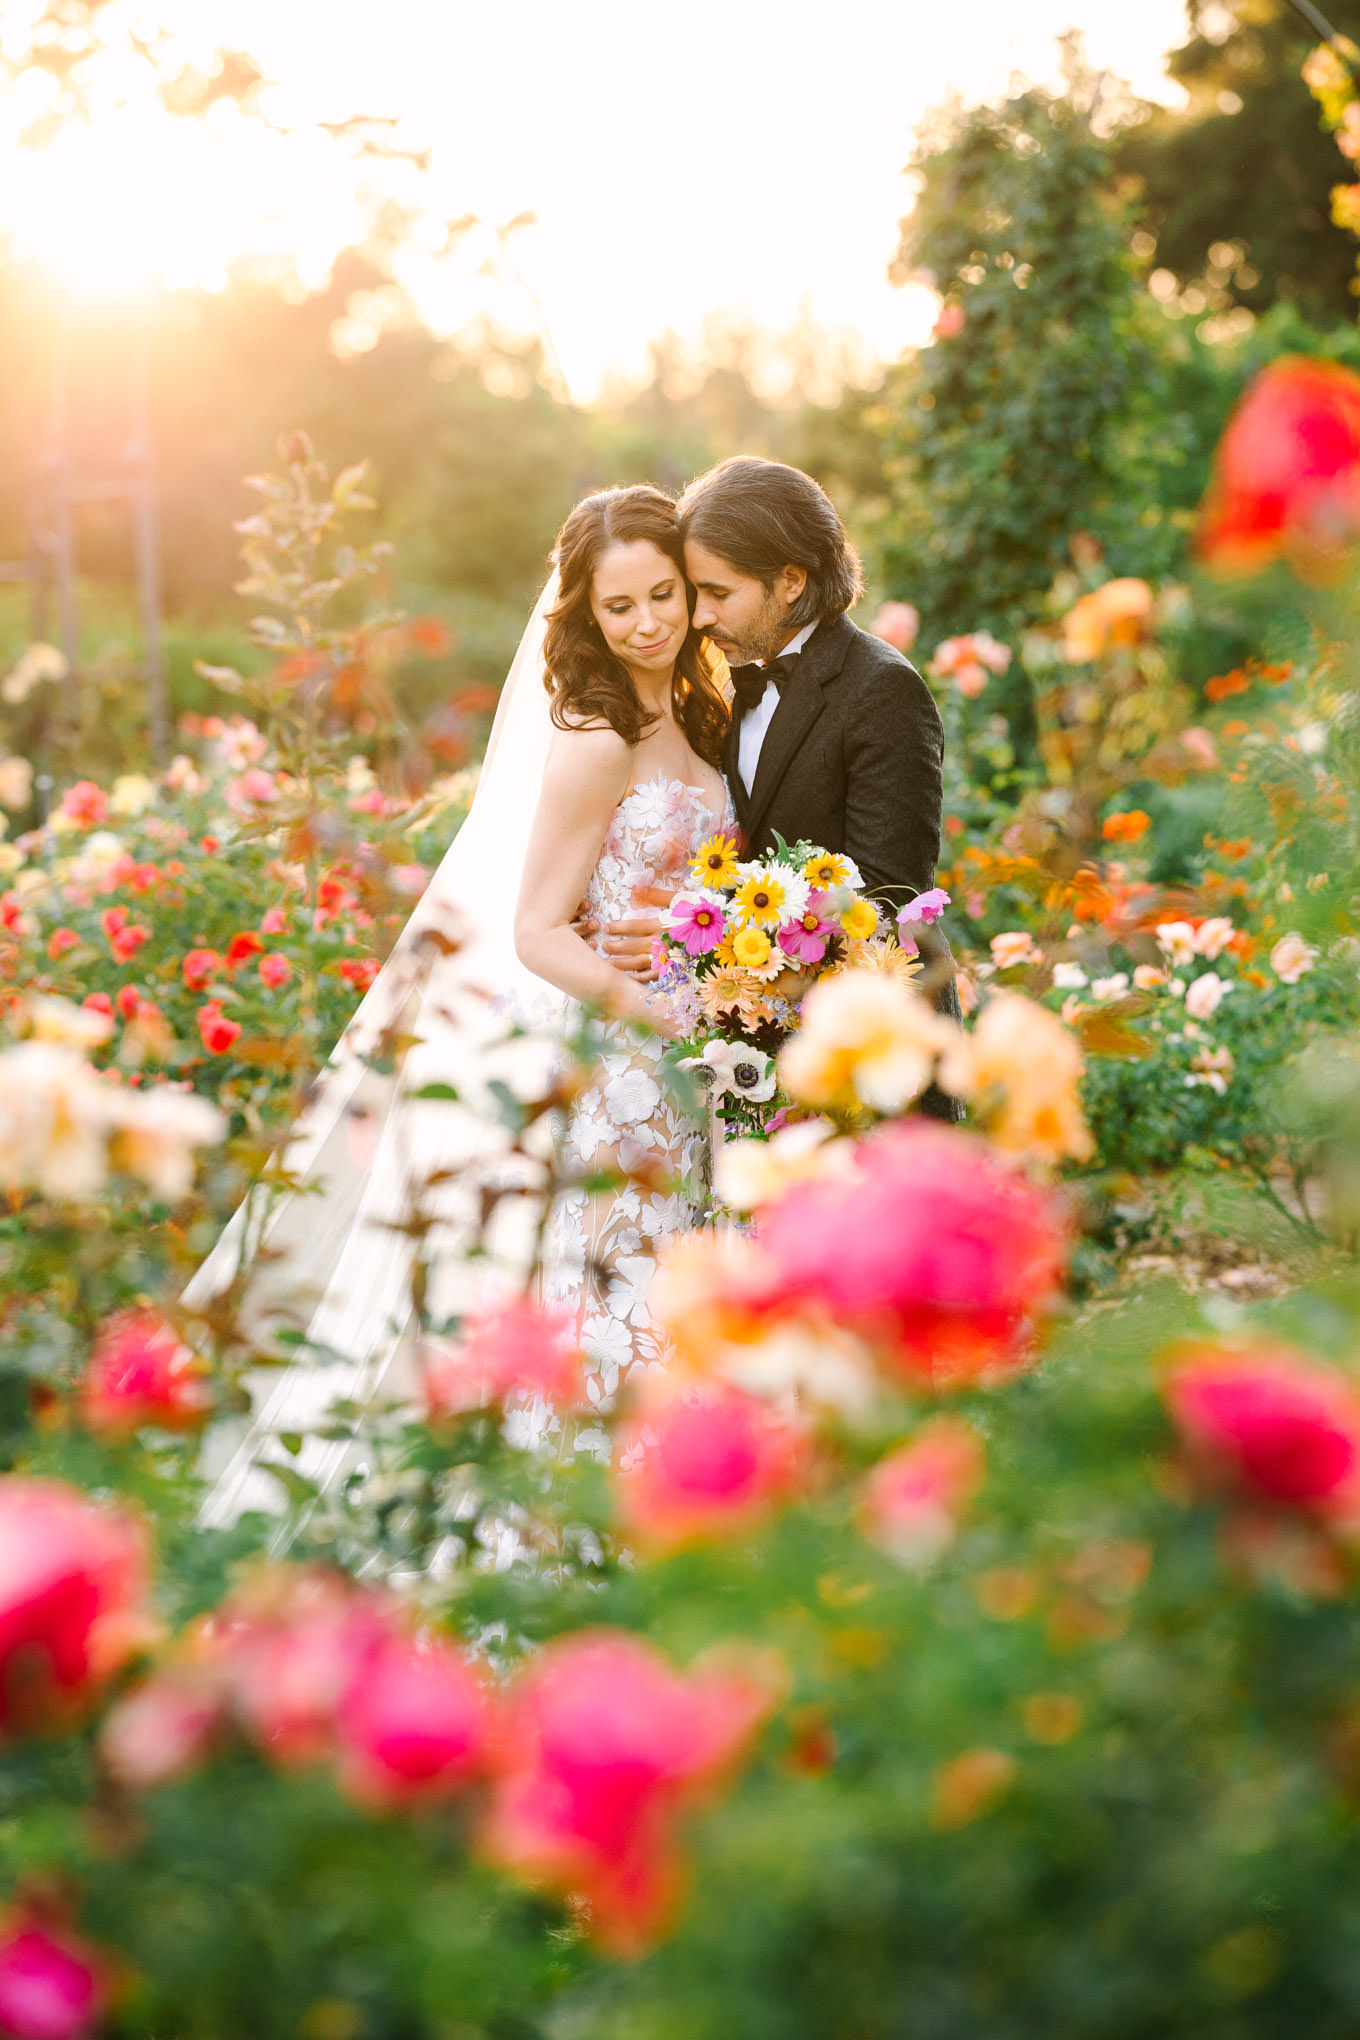 Bride and groom in Huntington Gardens rose garden | wedding and elopement photography roundup | Los Angeles and Palm Springs photographer | #losangeleswedding #palmspringswedding #elopementphotographer Source: Mary Costa Photography | Los Angeles